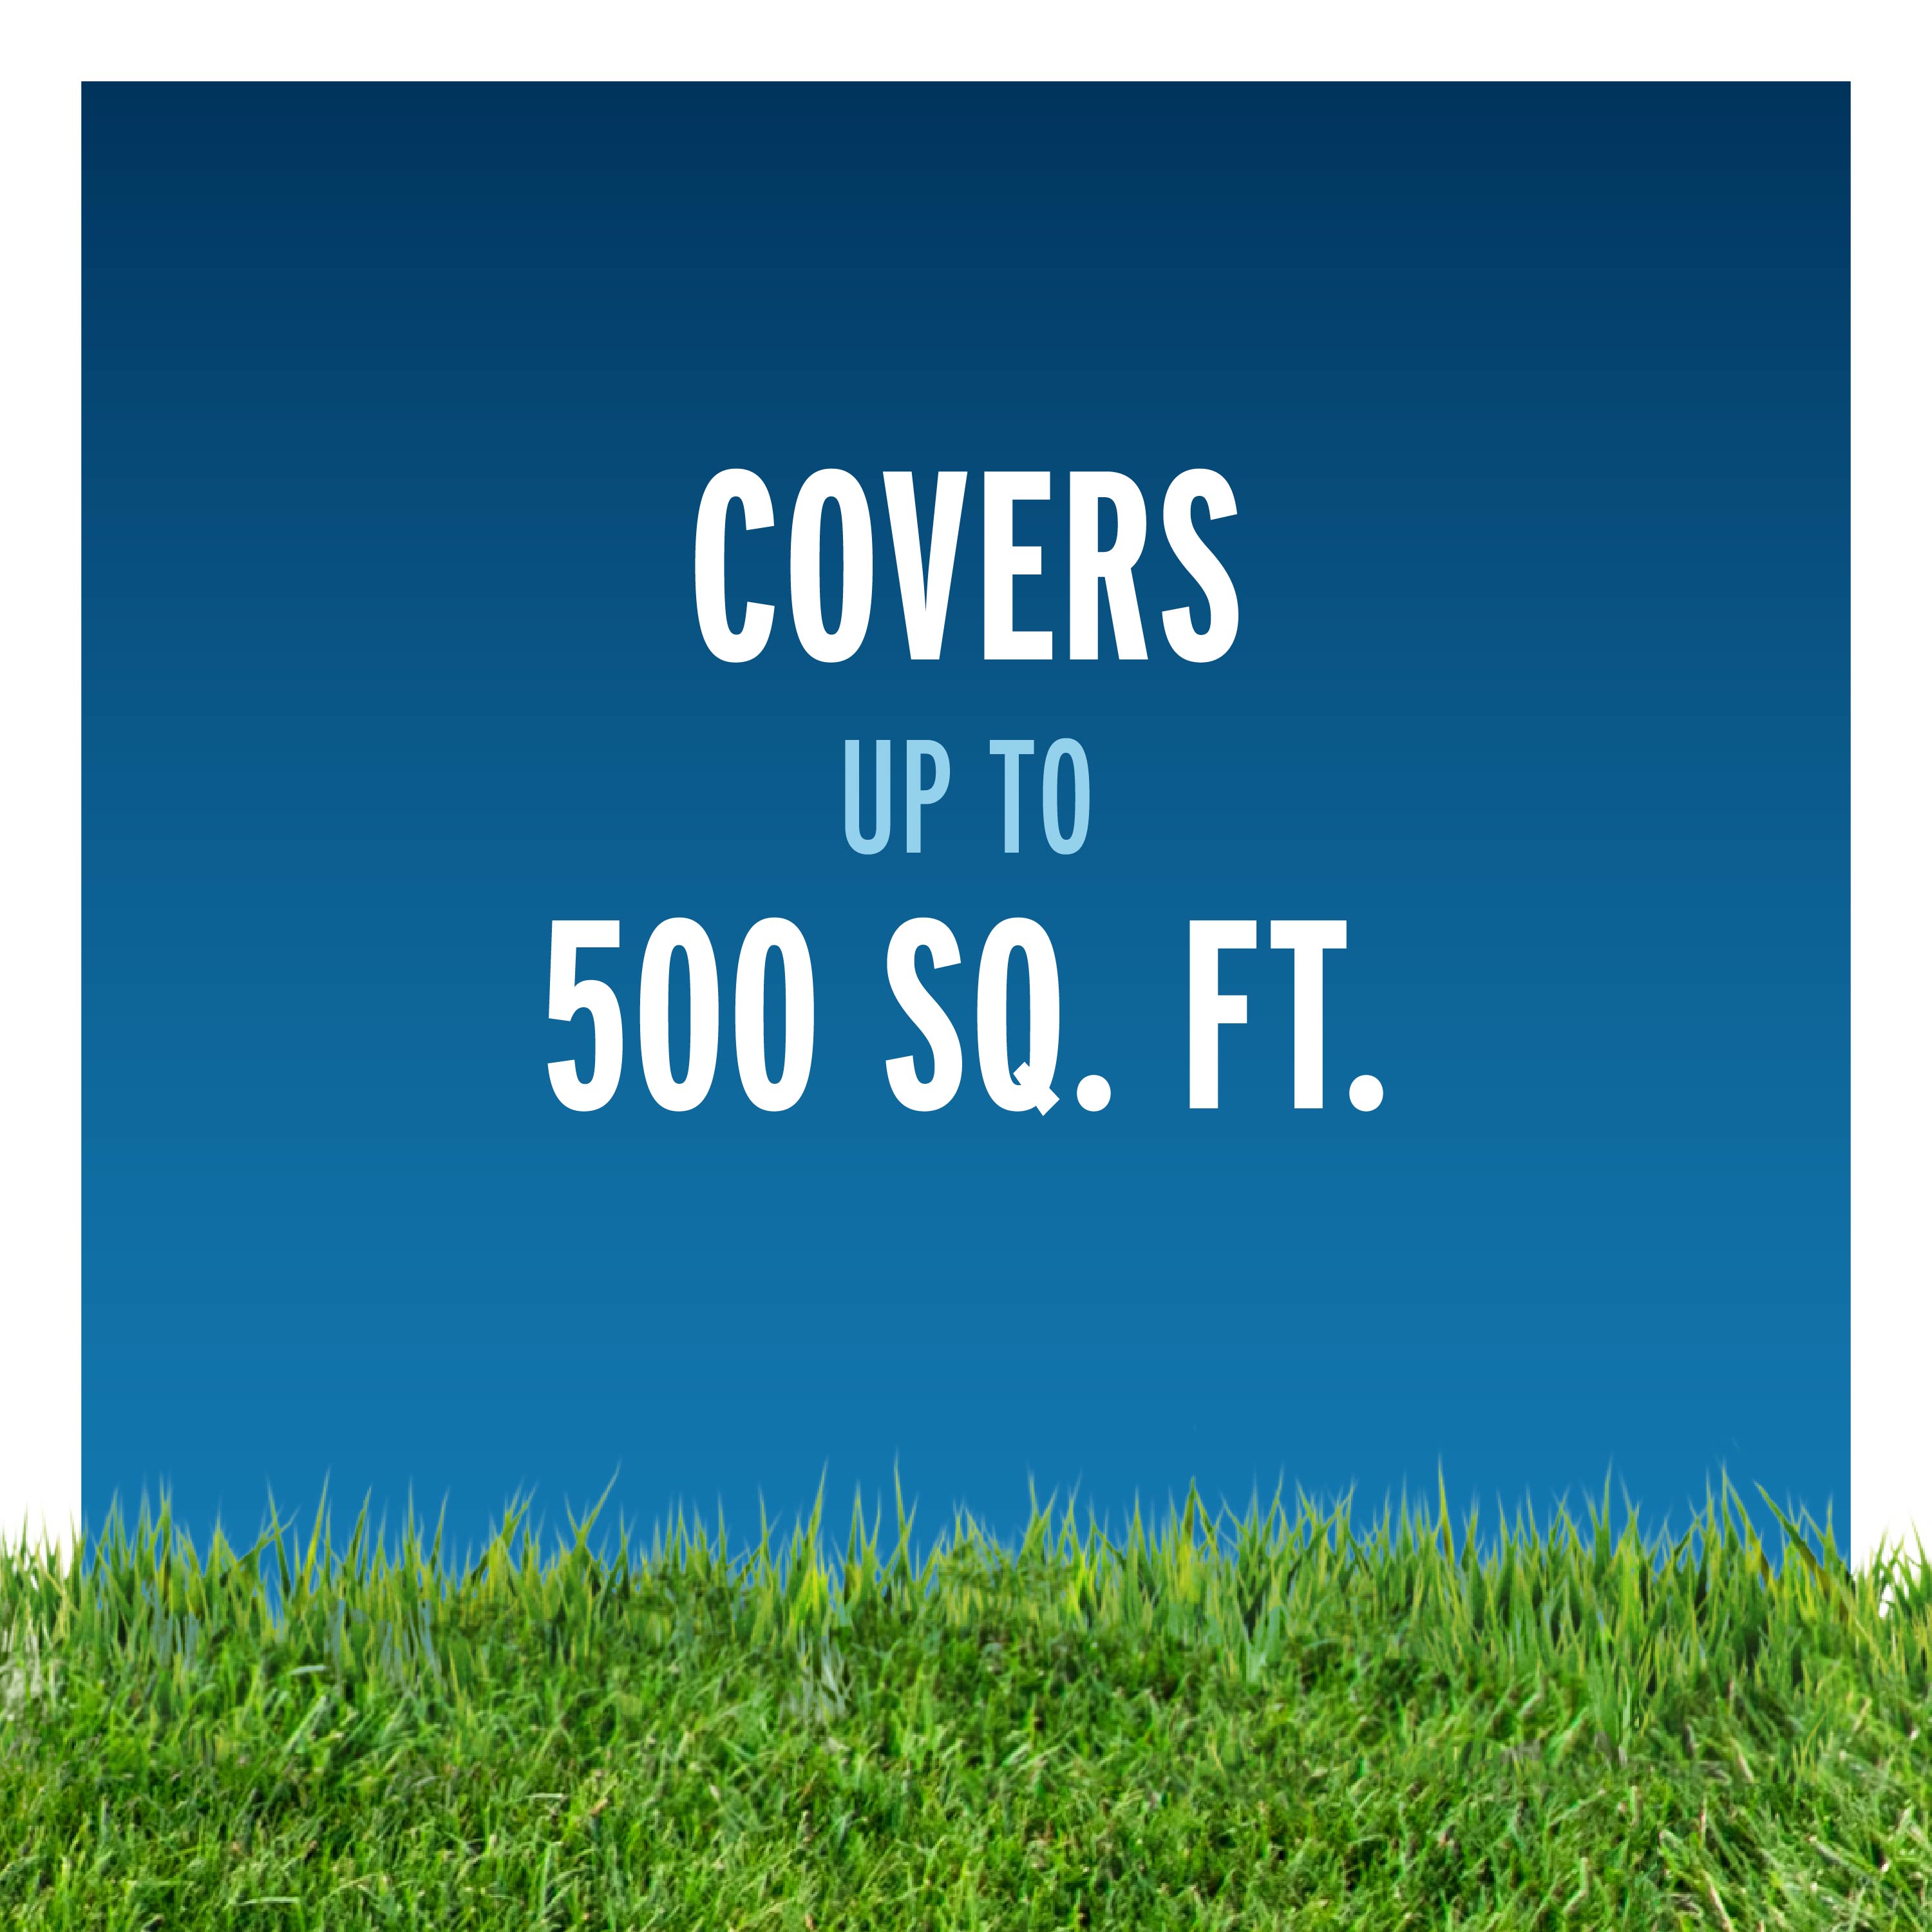 covers up tp 500 sq. ft. 